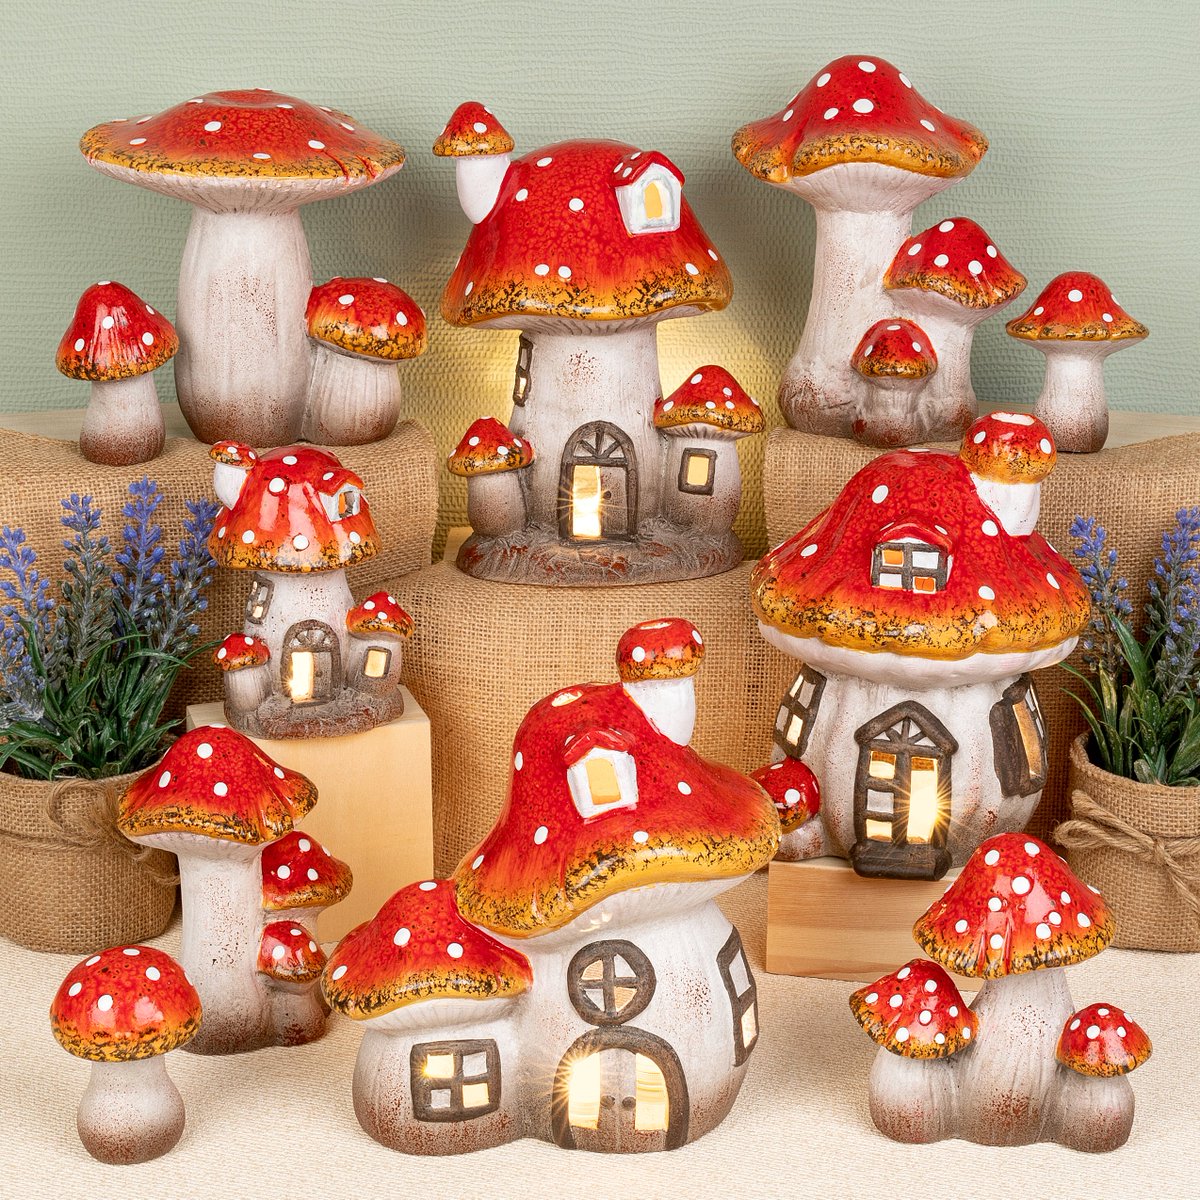 Introducing our enchanting Mystic Mushrooms collection. Whether you're a nature lover or a fan of fairy tales, these charming tealights and mushroom figures will add a magical touch to your space. Follow the link below to see the full range; shop.joedavies.co.uk/range/wr13999